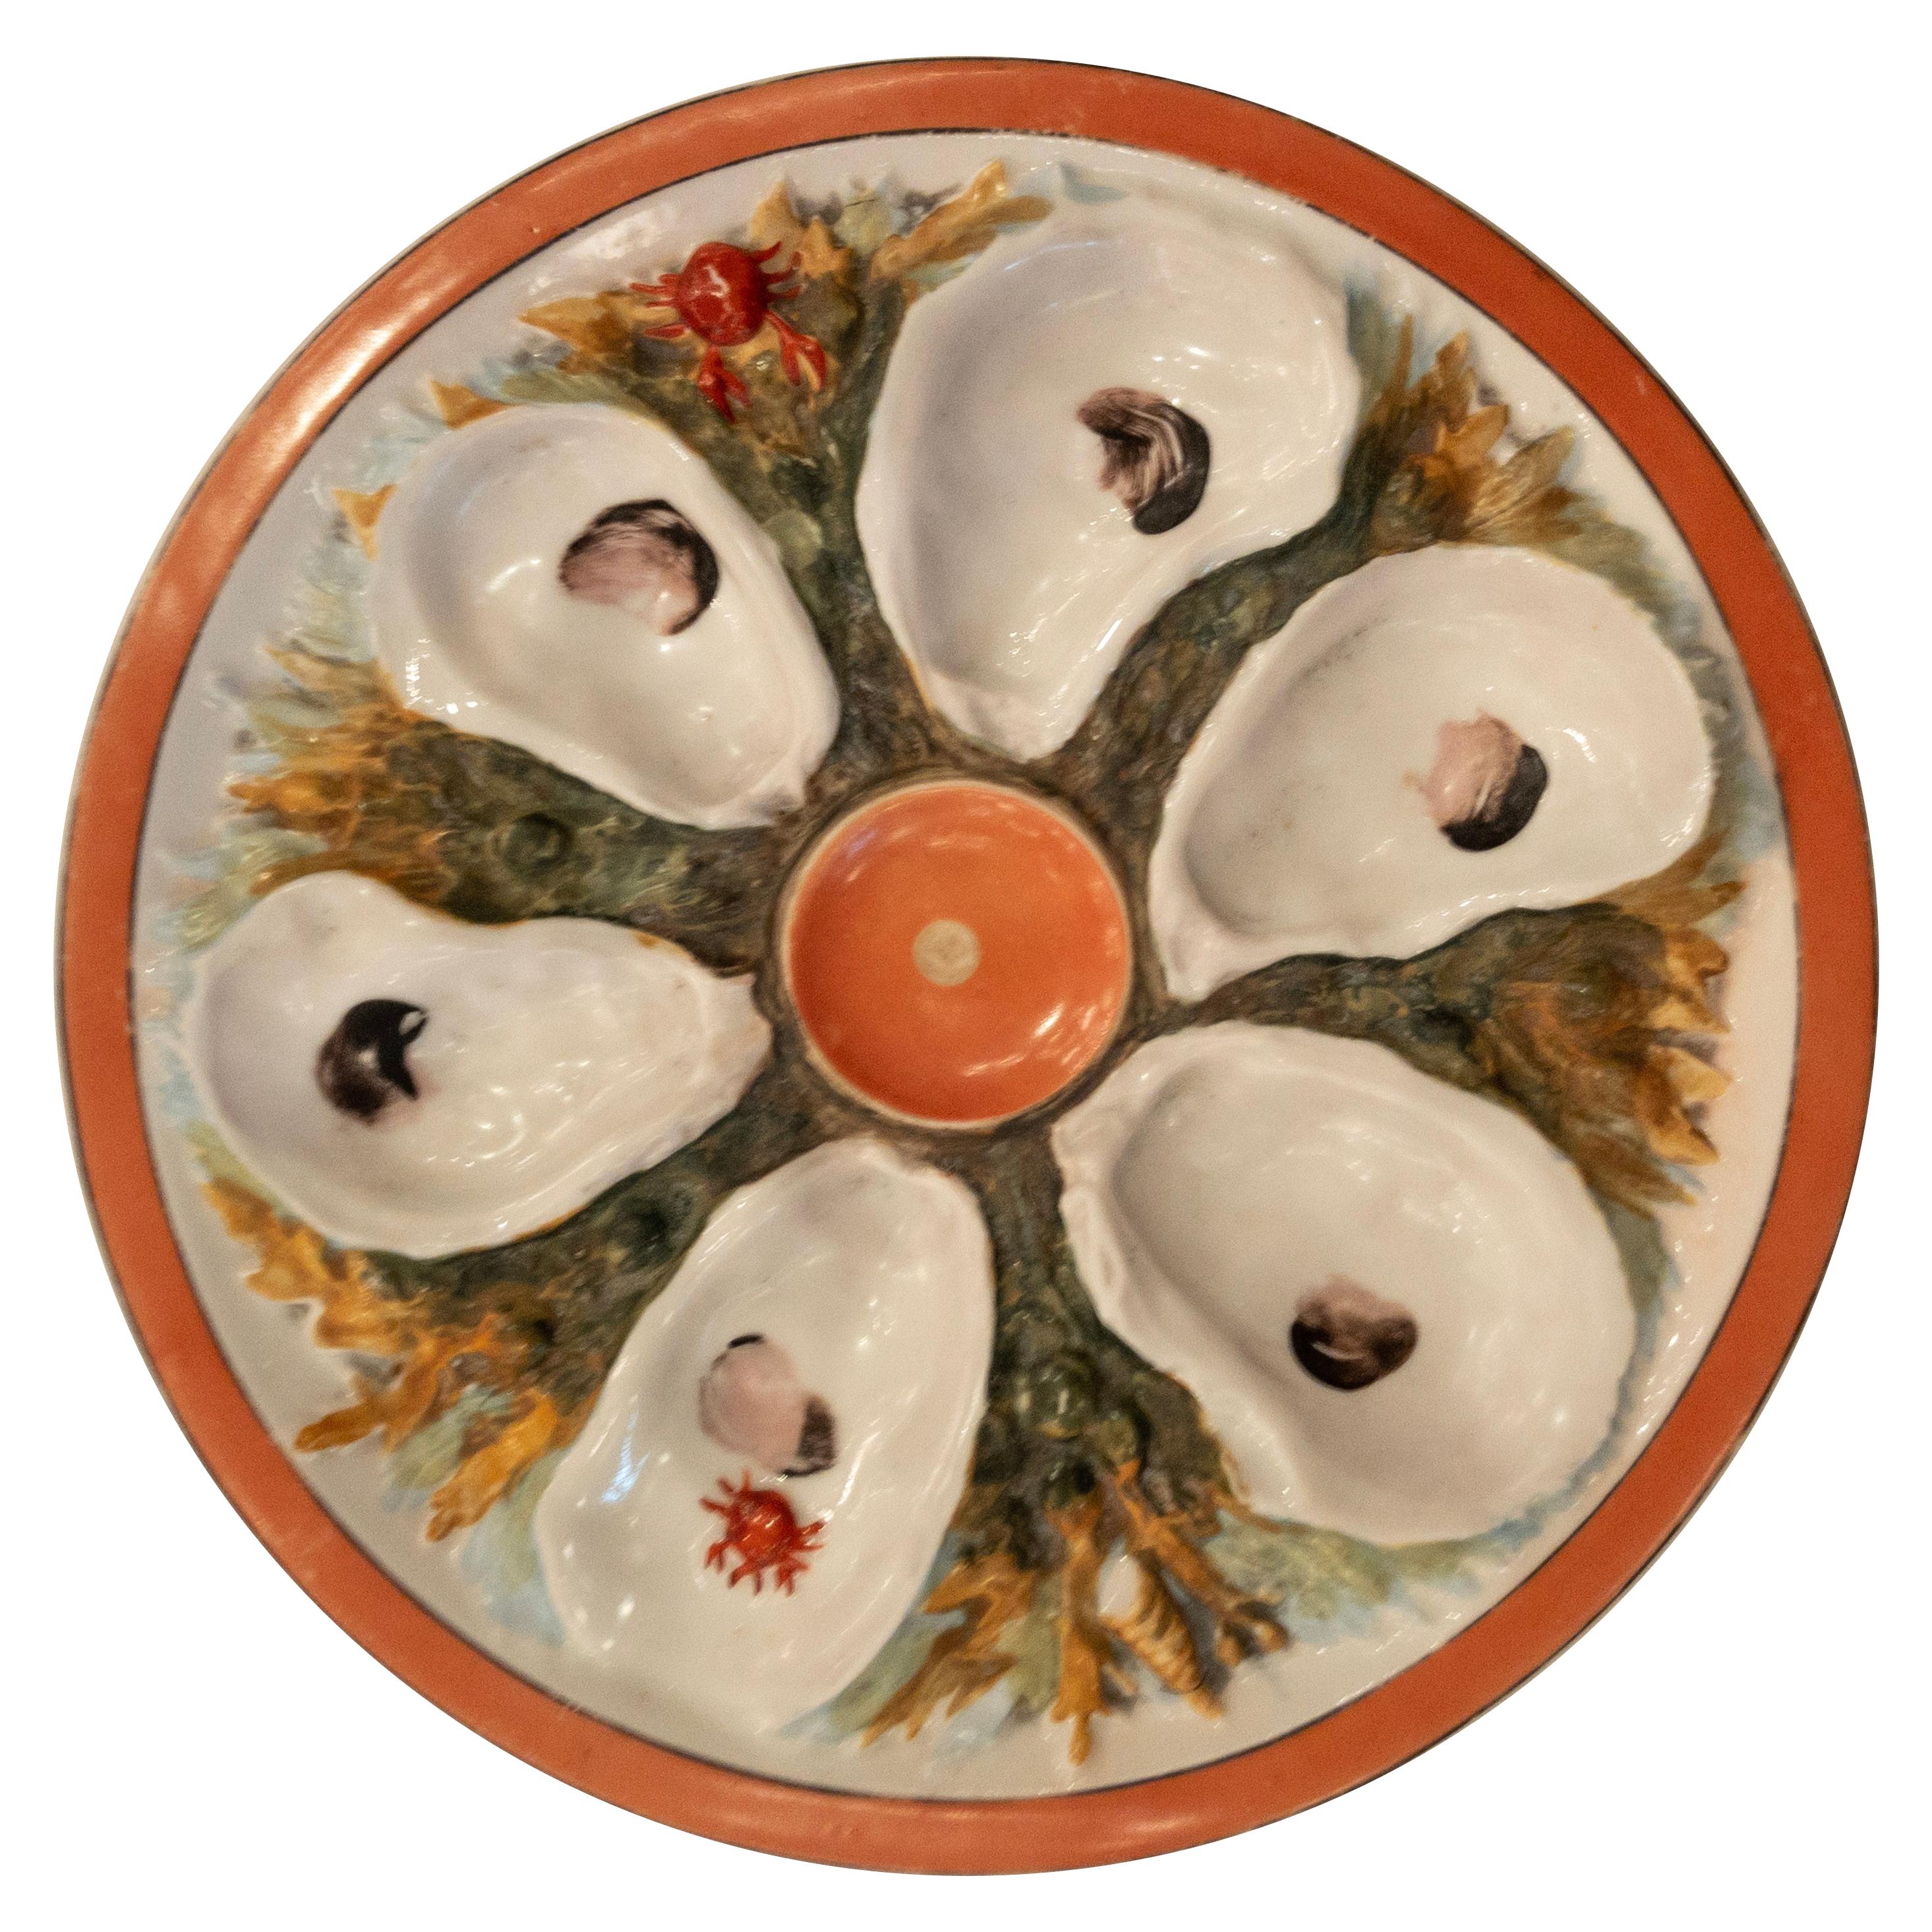 Antique American Union Porcelain Works Oyster Plate, circa 1880